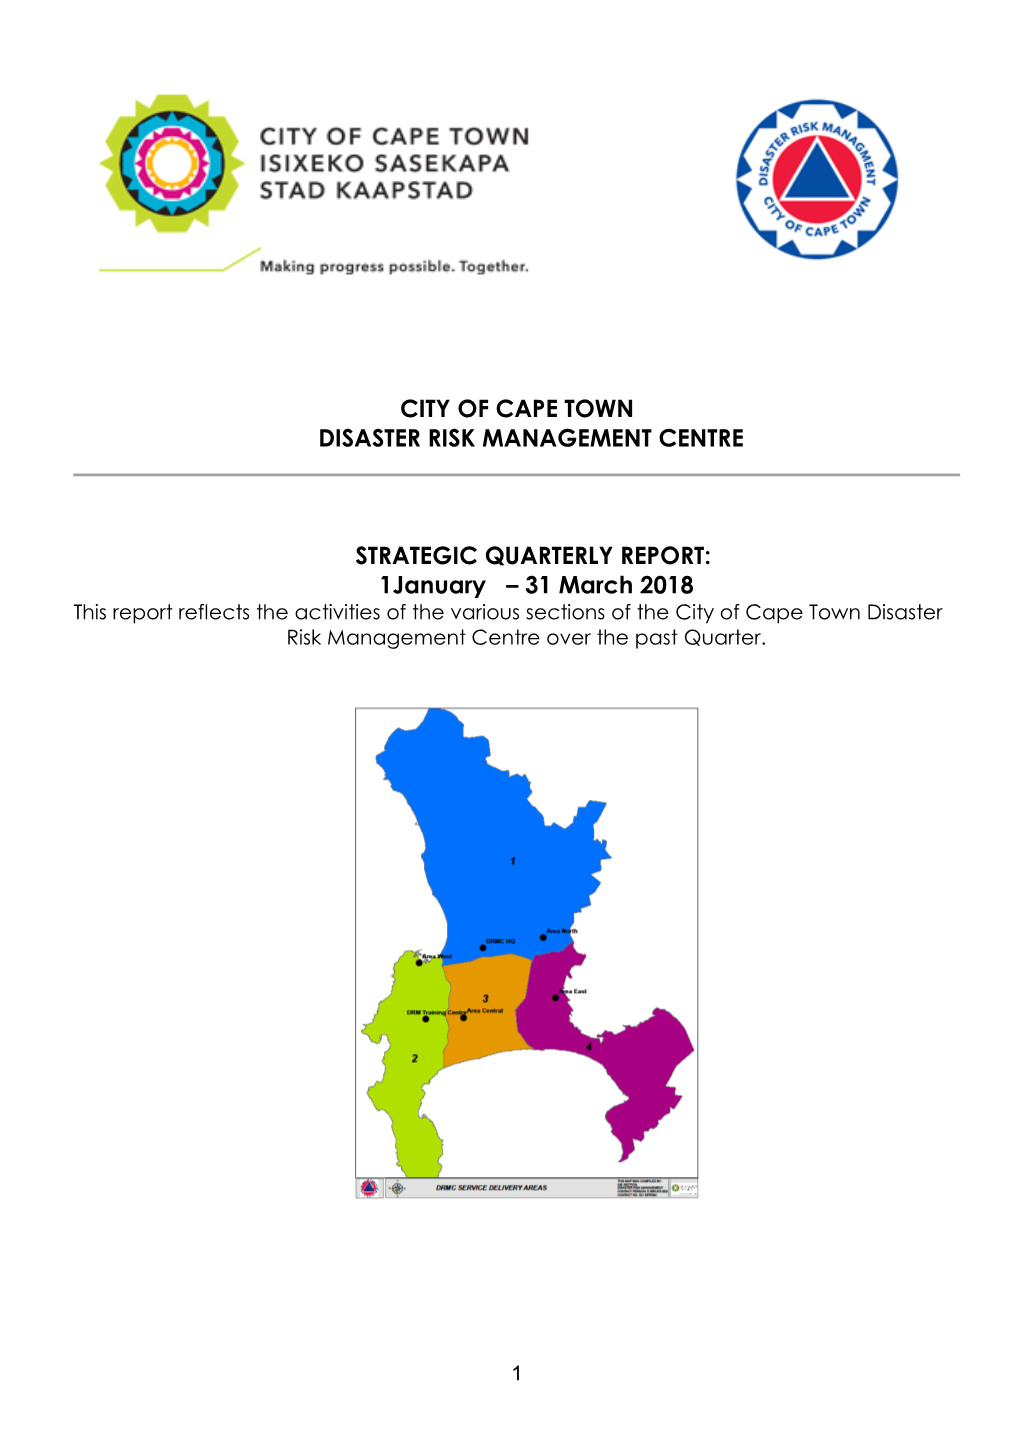 31 March 2018 This Report Reflects the Activities of the Various Sections of the City of Cape Town Disaster Risk Management Centre Over the Past Quarter